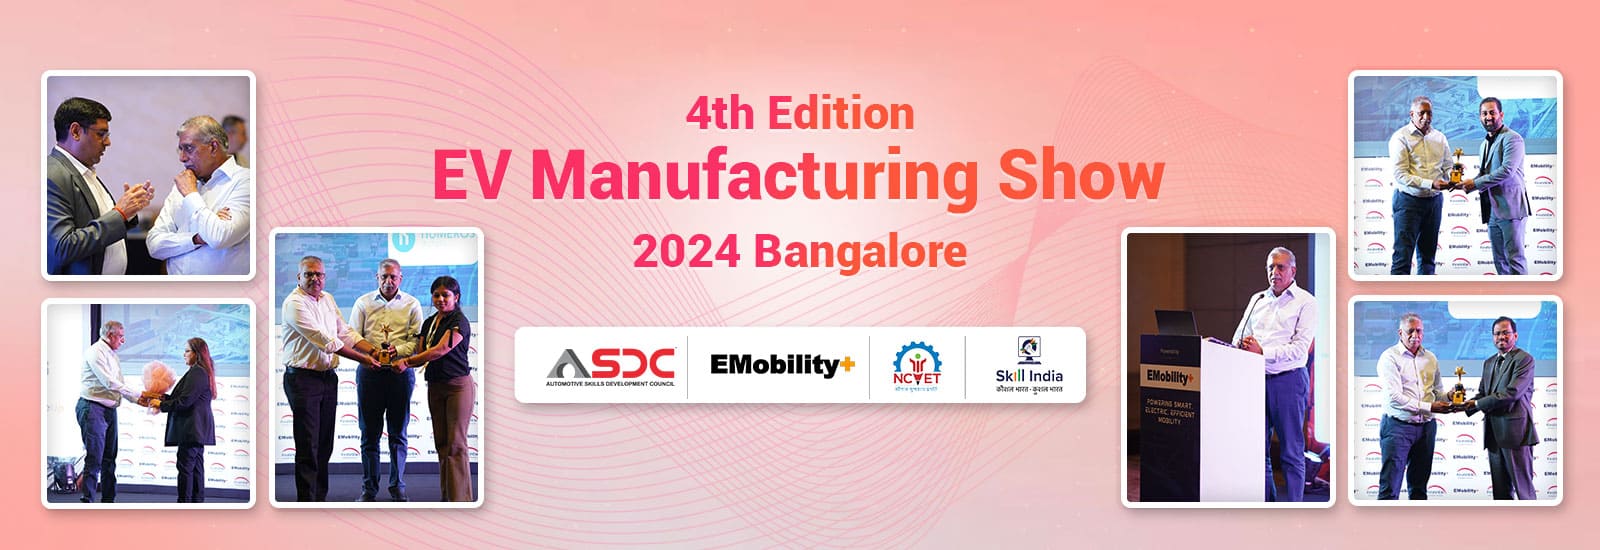 4th Edition EV Manufacturing Show 2024 in Bangalore